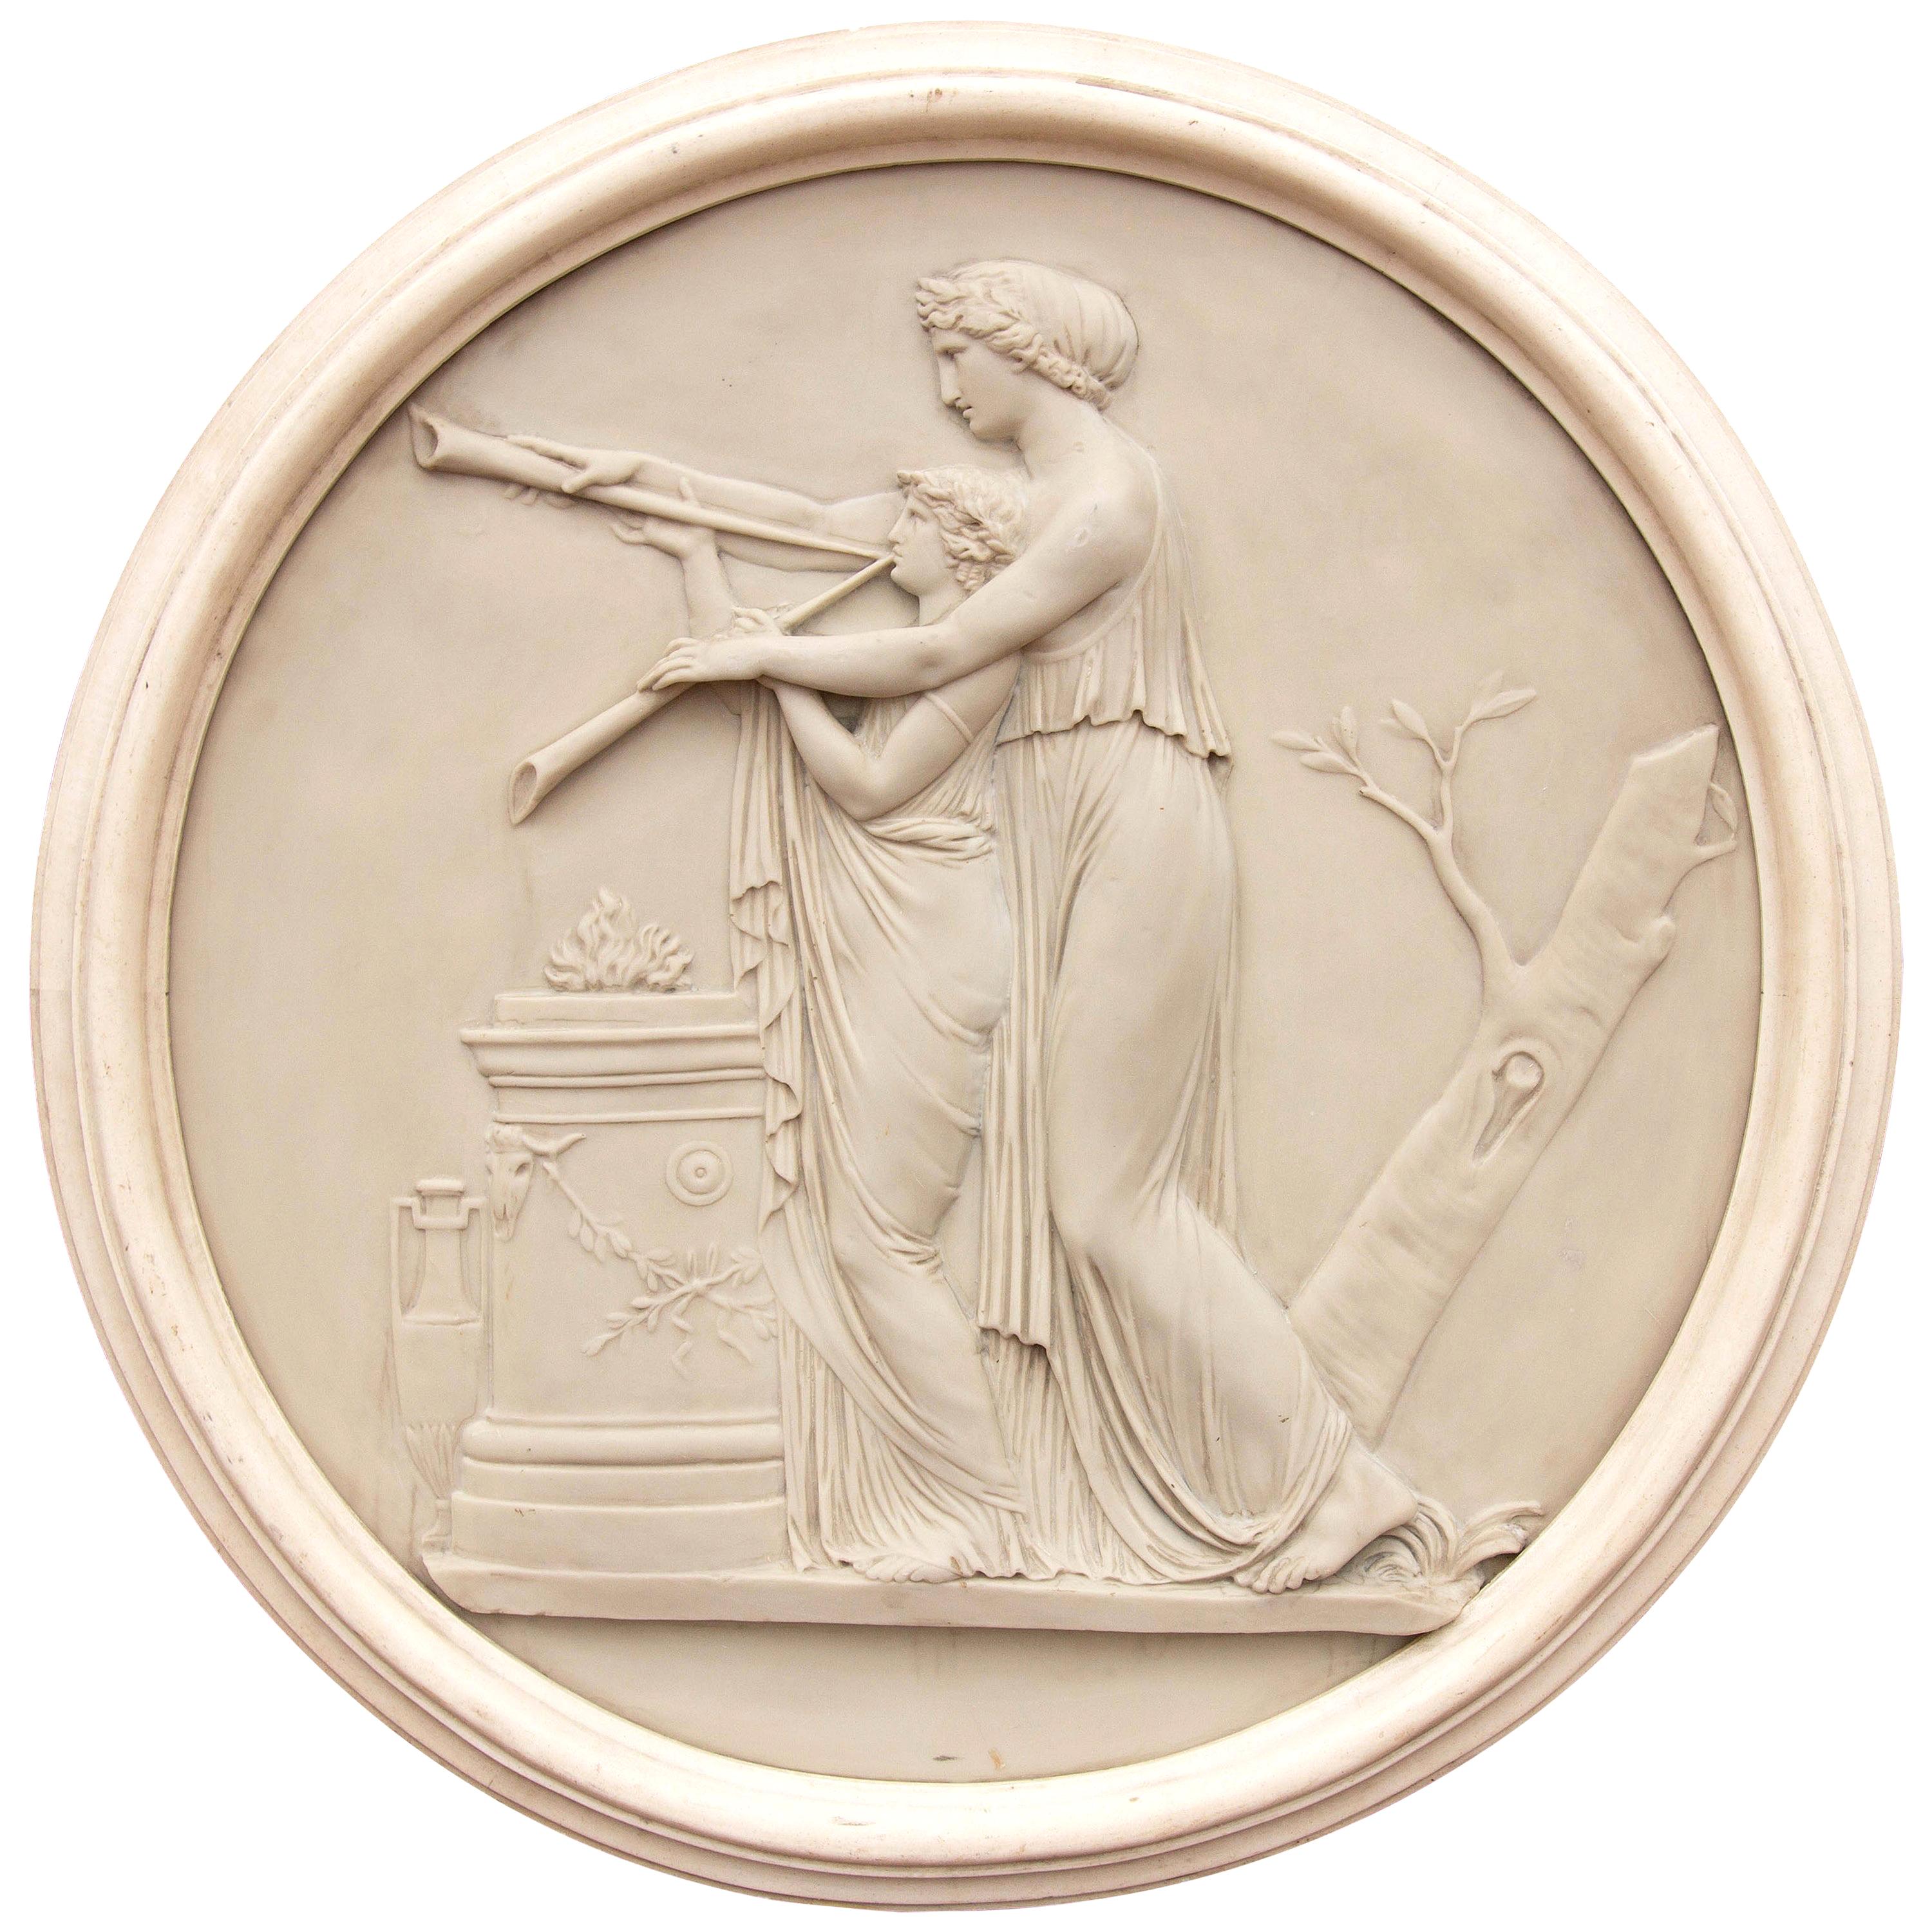 Classical Greek Architectural Roundel Sculpture